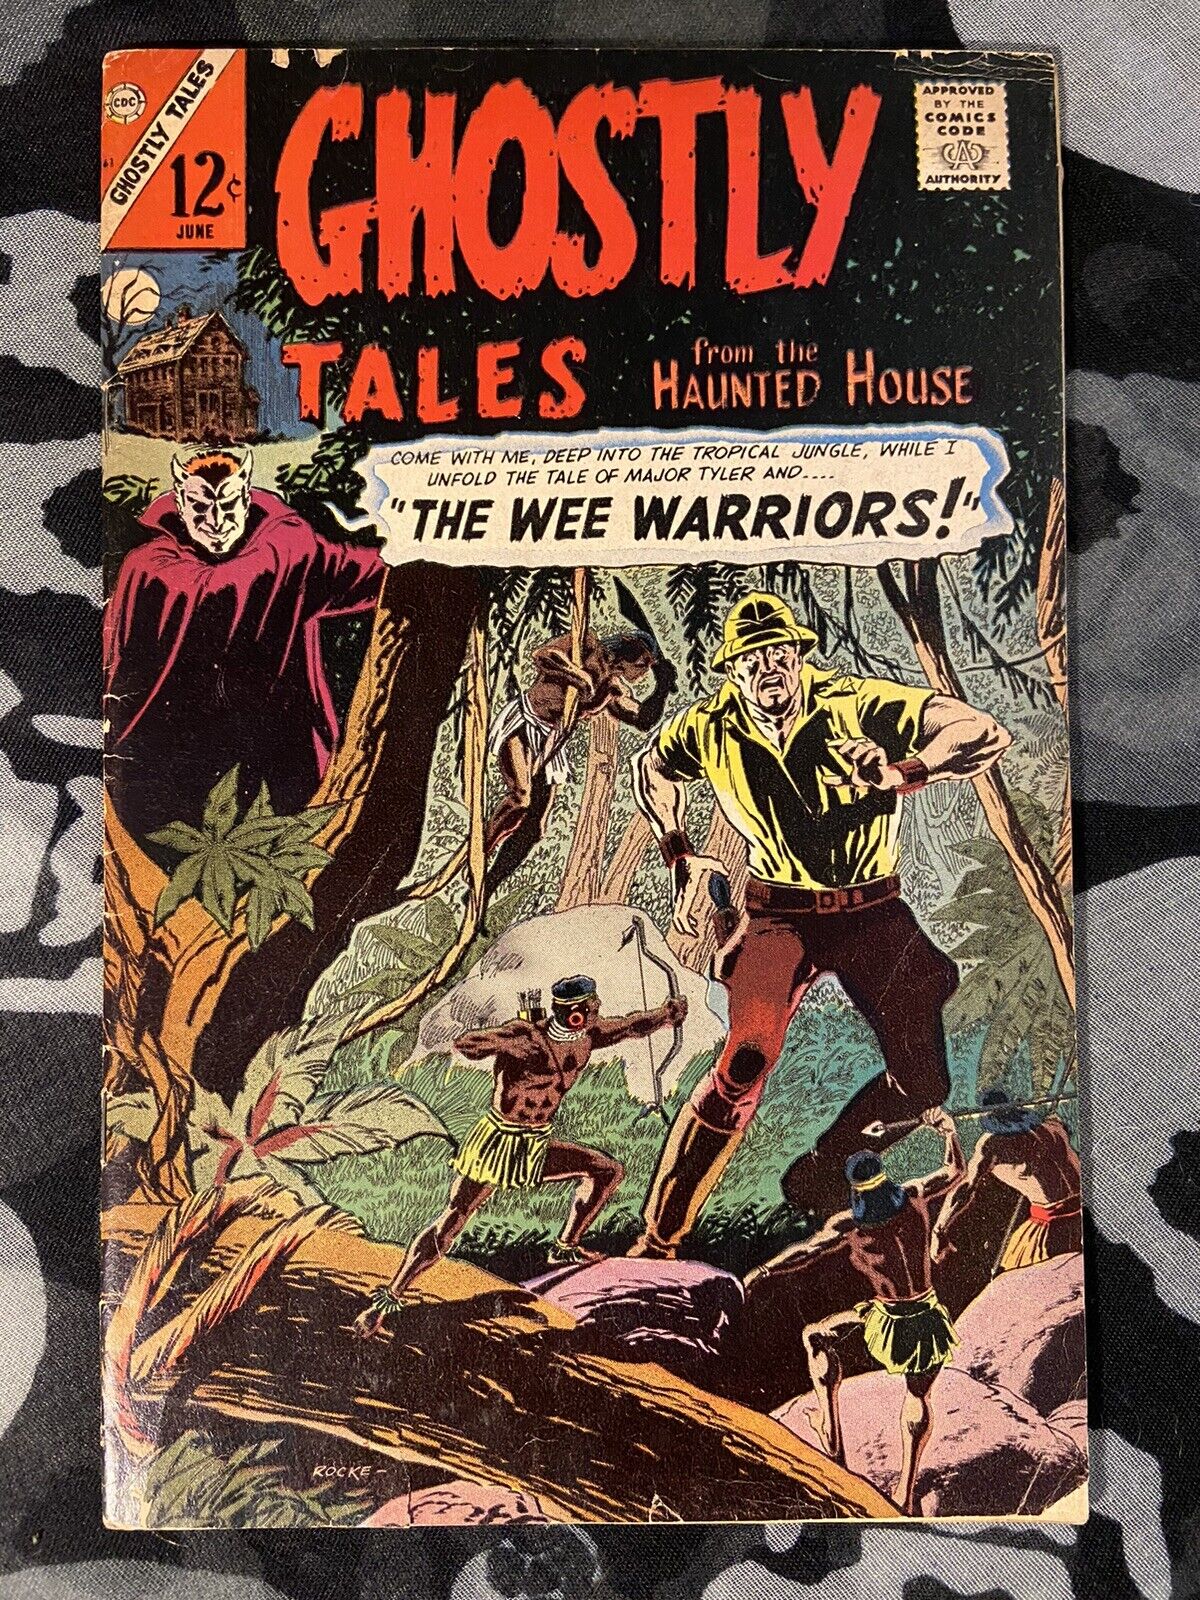 GHOSTLY TALES #61 (1967) SILVER AGE HORROR ROCKE MASTEROSERIO COVER